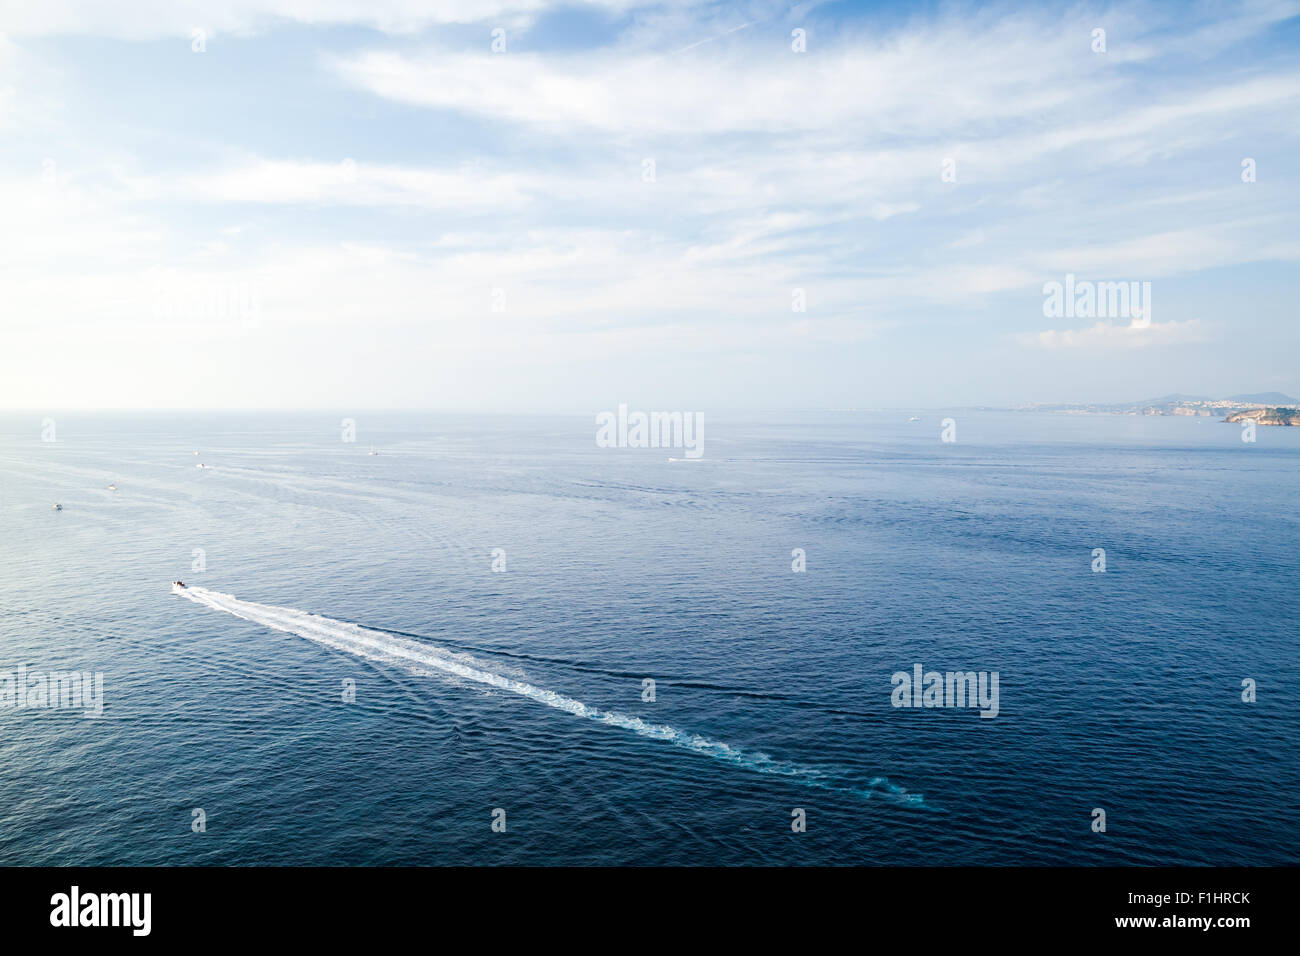 Mediterranean sea landscape with wake of small fast motorboat under blue cloudy sky Stock Photo